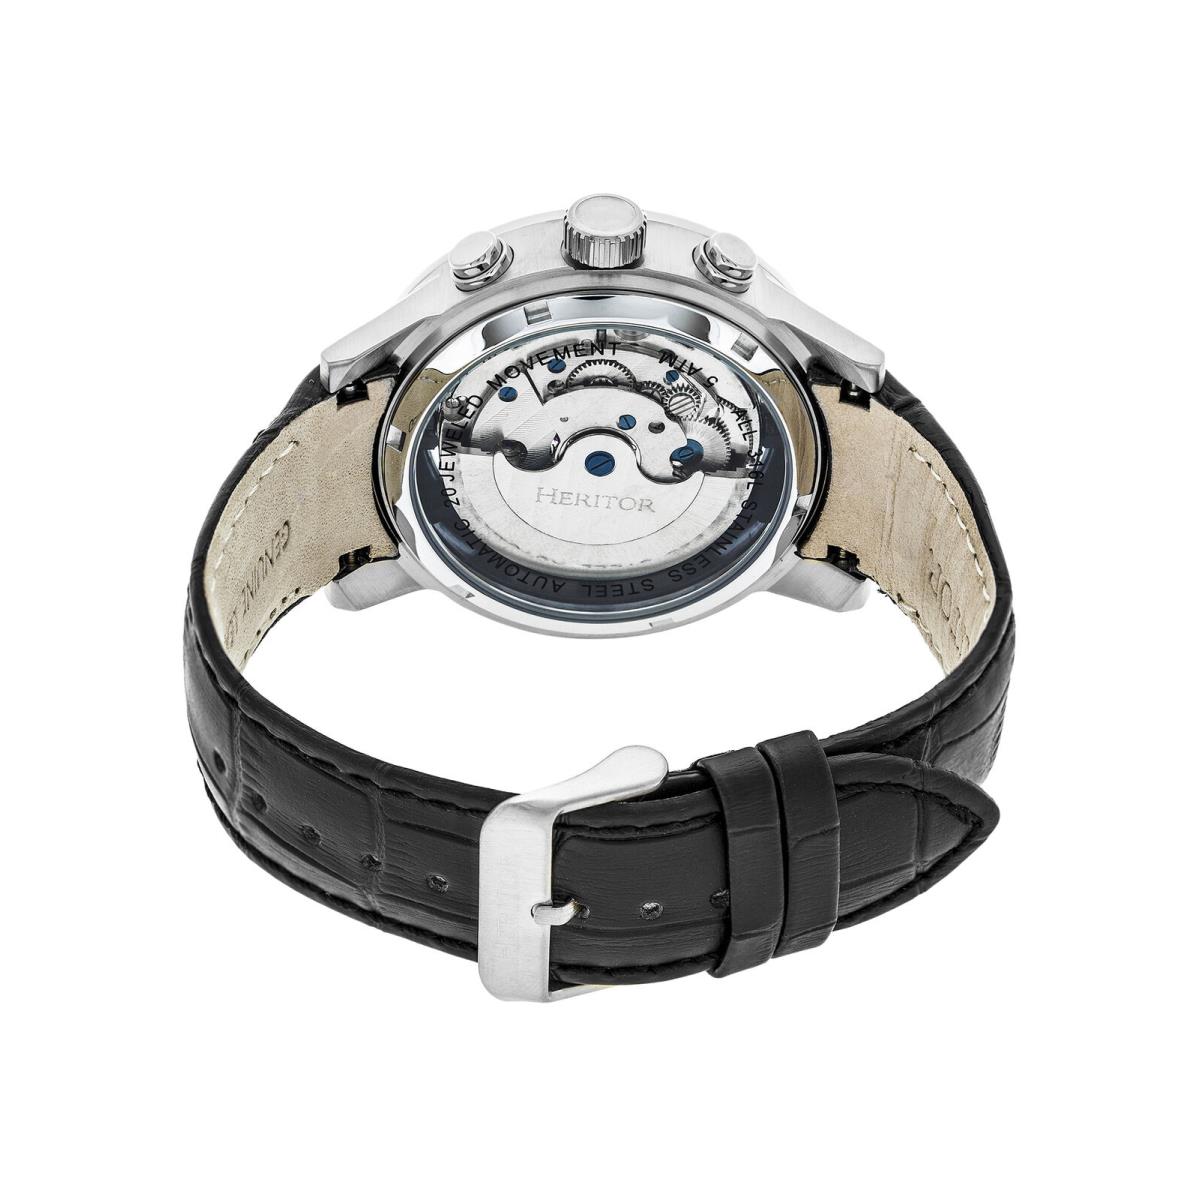 Heritor Automatic Hannibal Semi-skeleton Leather-band Watch - Silver